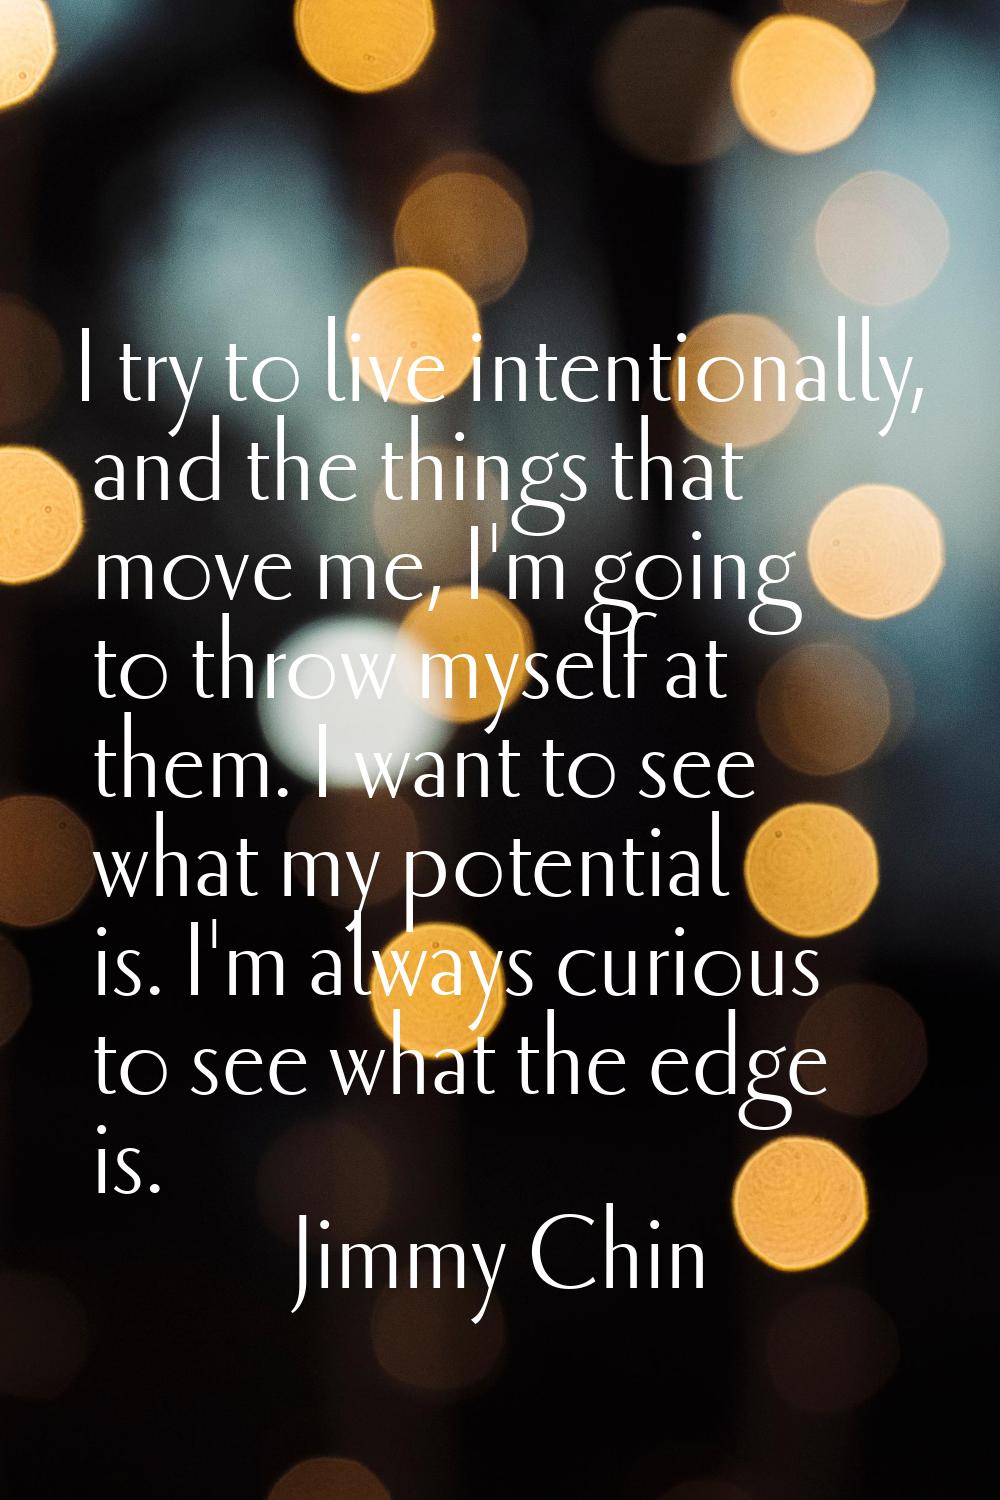 I try to live intentionally, and the things that move me, I'm going to throw myself at them. I want